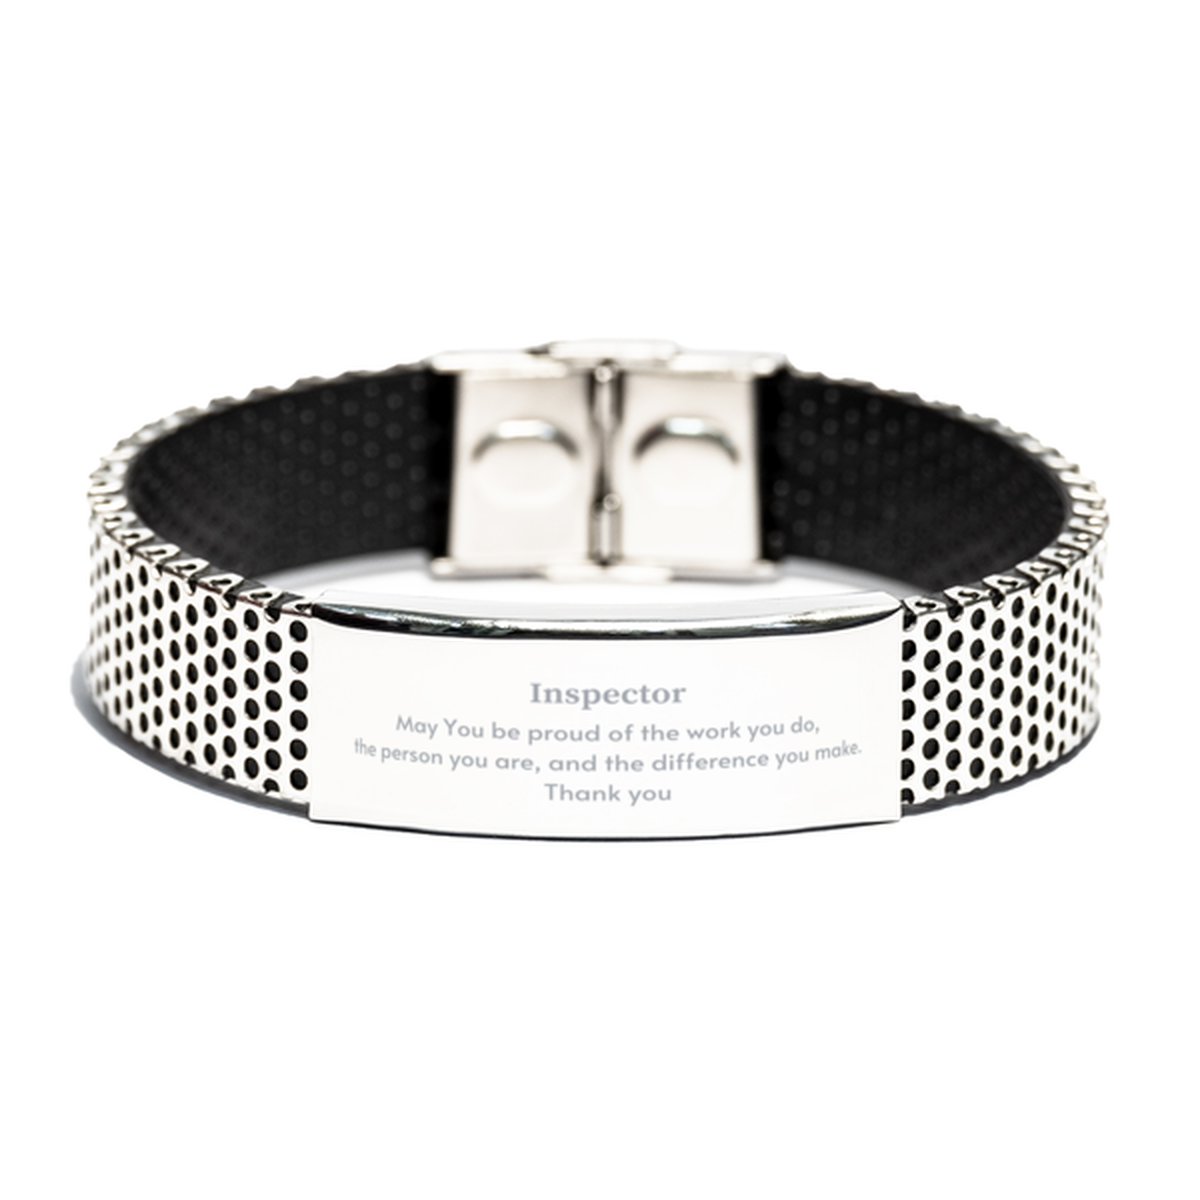 Heartwarming Stainless Steel Bracelet Retirement Coworkers Gifts for Inspector, Inspector May You be proud of the work you do, the person you are Gifts for Boss Men Women Friends